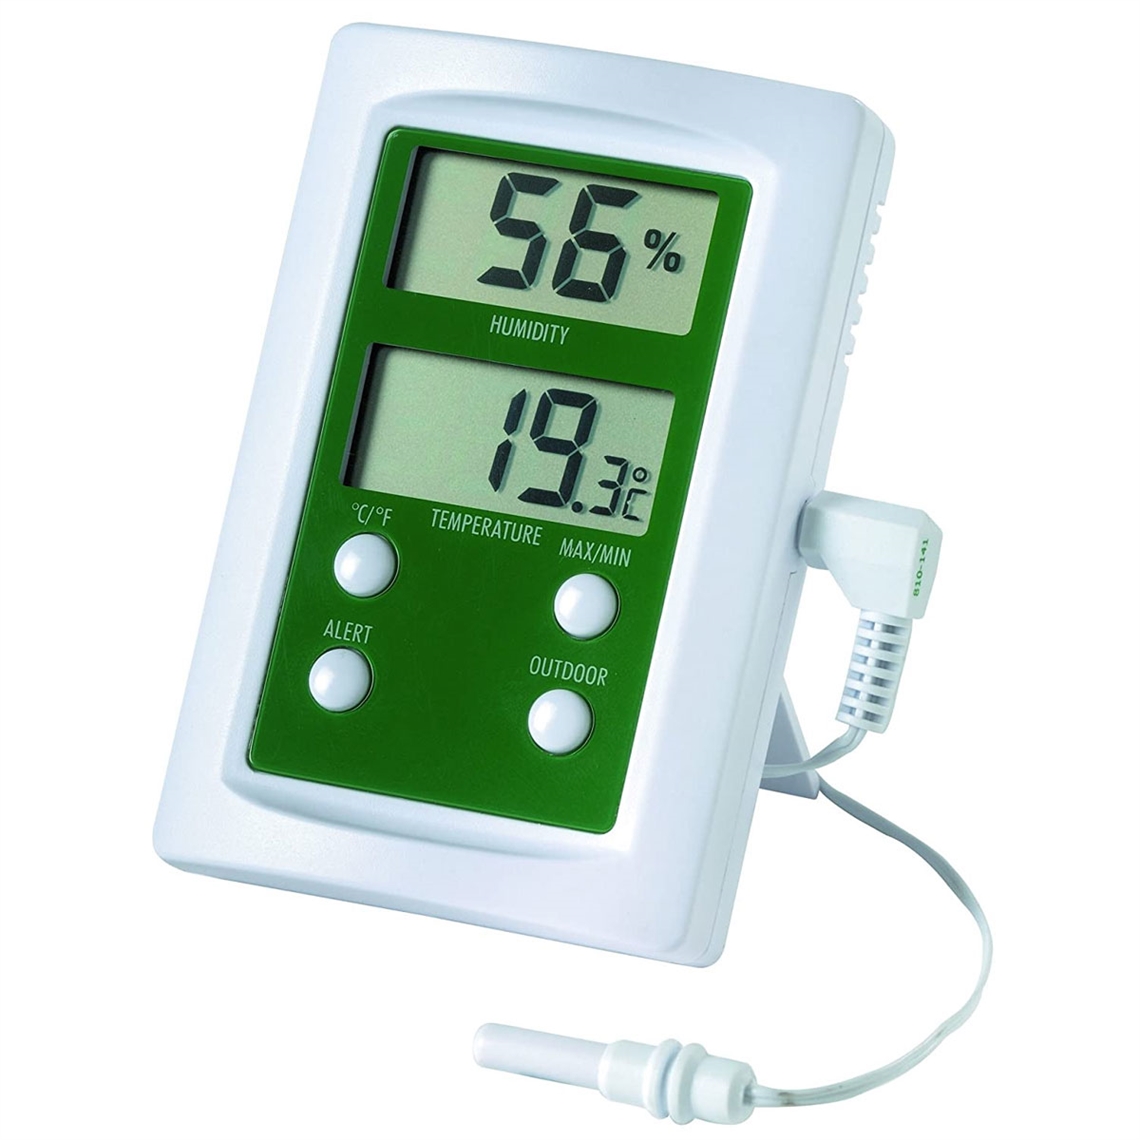 View more thermo hygrometers from our Thermo Hygrometers range